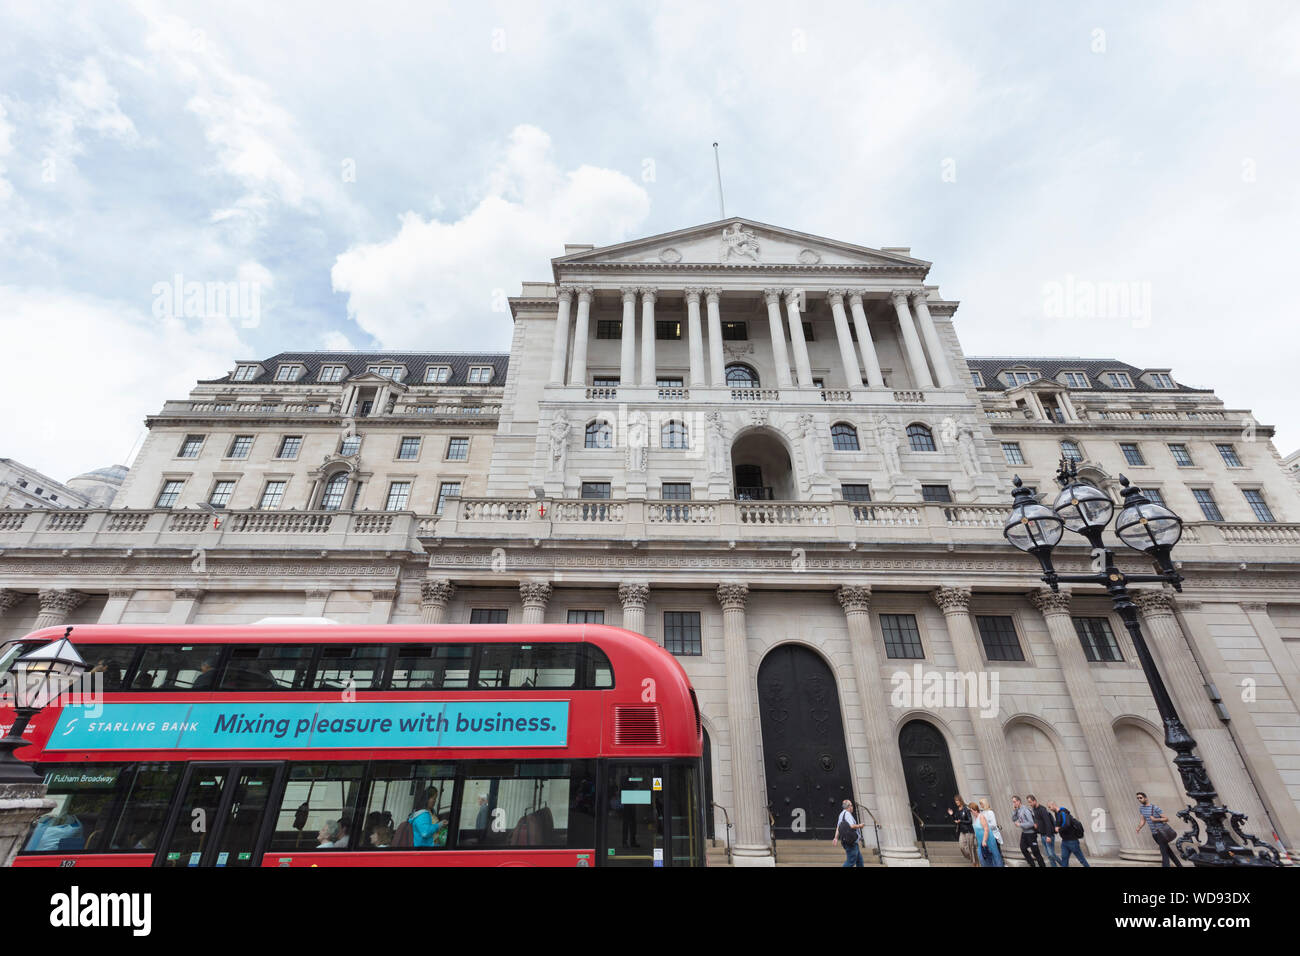 Bank of England building in the City of London, England Stock Photo